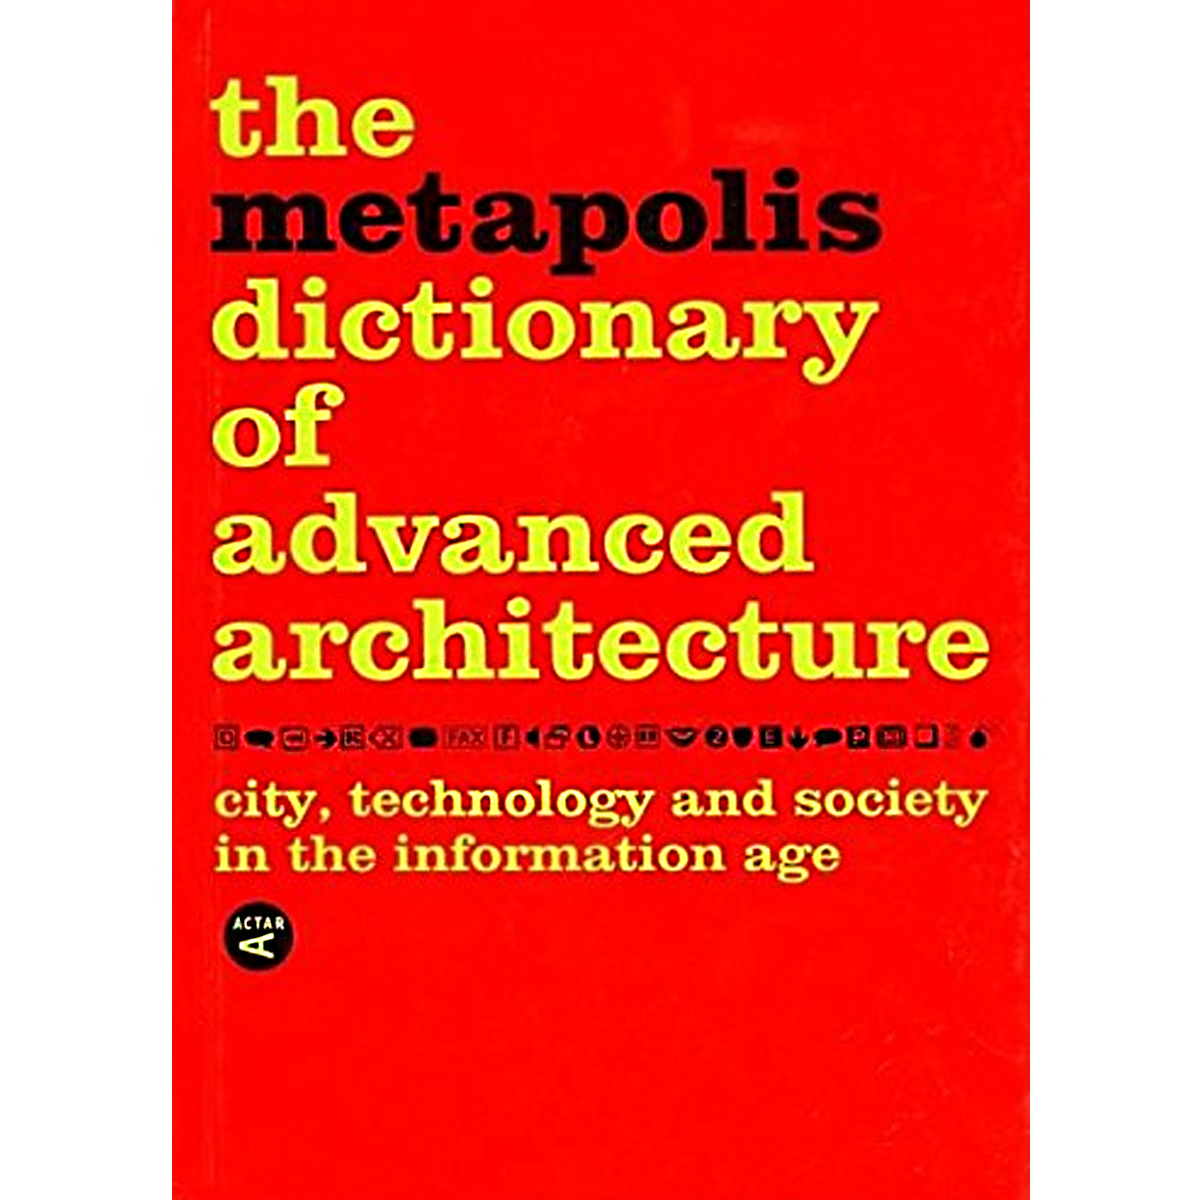 The Metapolis Dictionary of Advanced Architecture